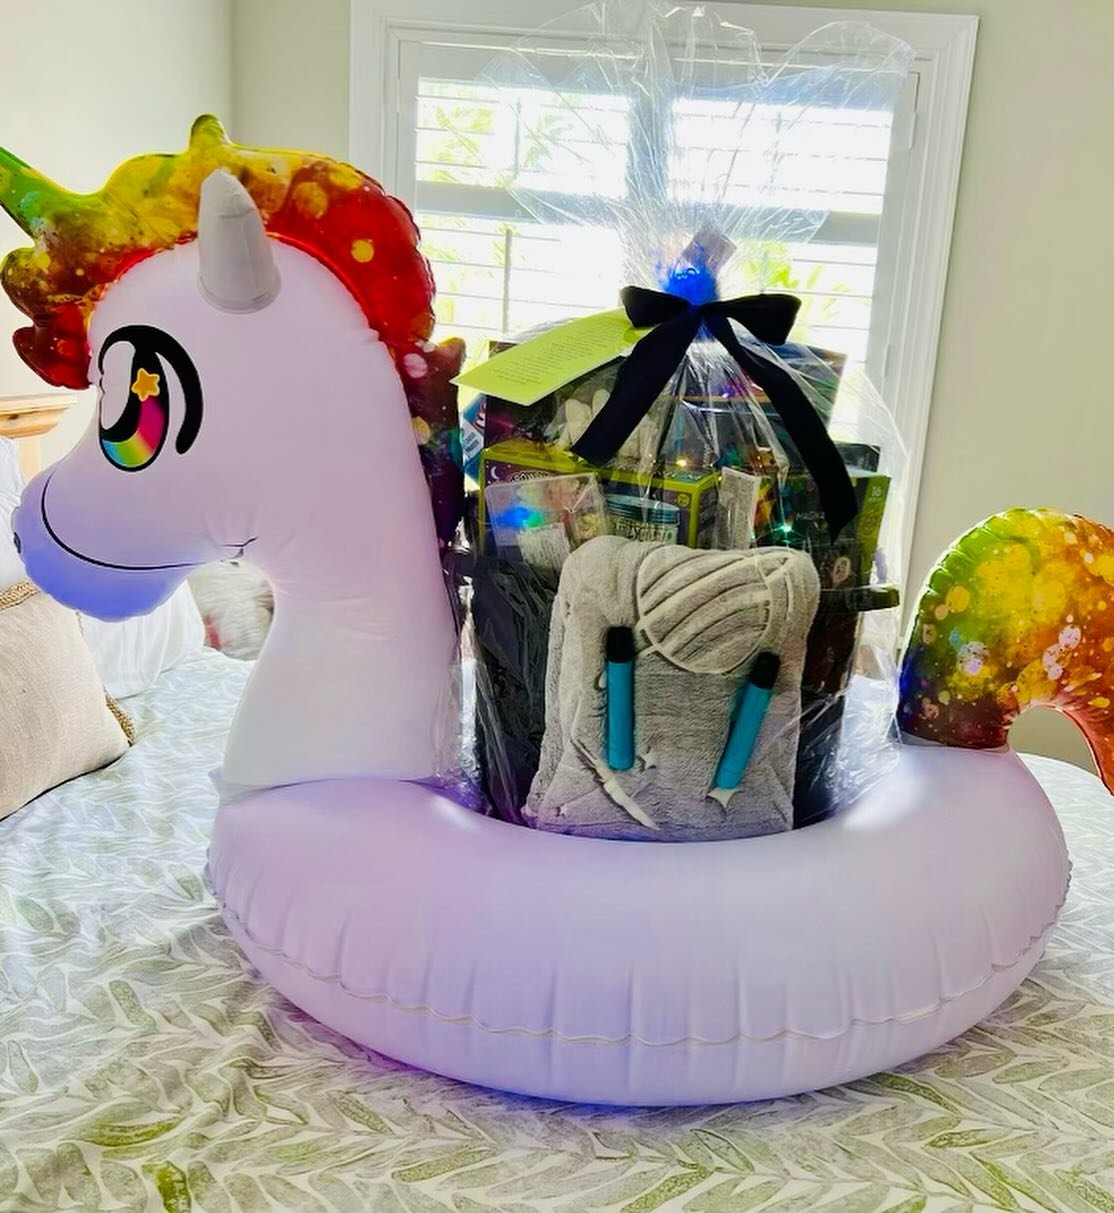 SNEAK PEAK at one of our amaaaaaaazing Creative Arts Night raffle baskets! This one is &ldquo;It&rsquo;s Glow Time.&rdquo; You will not want to miss out on this raffle!

Save on raffle tickets by pre-purchasing them online by May 12 at rivergladespta